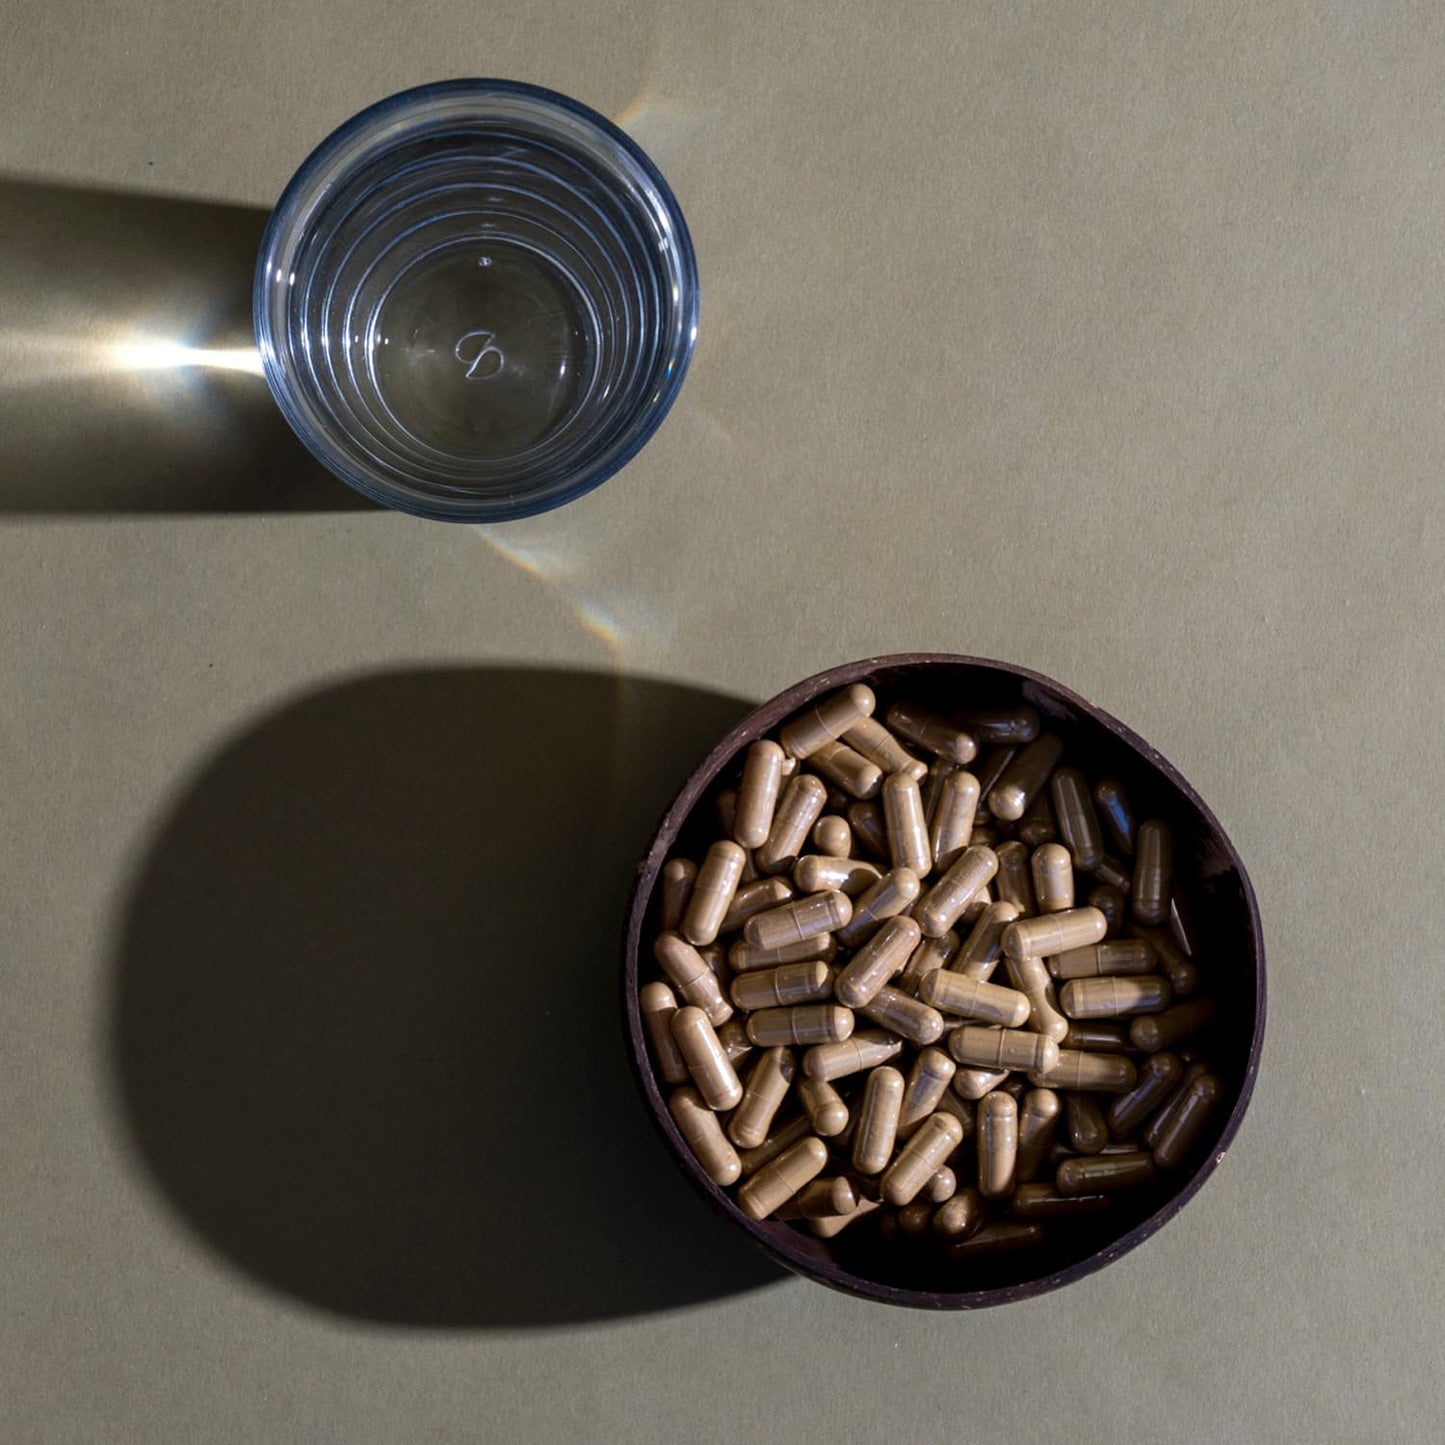 A bowl of brown capsules and a glass of water on a table